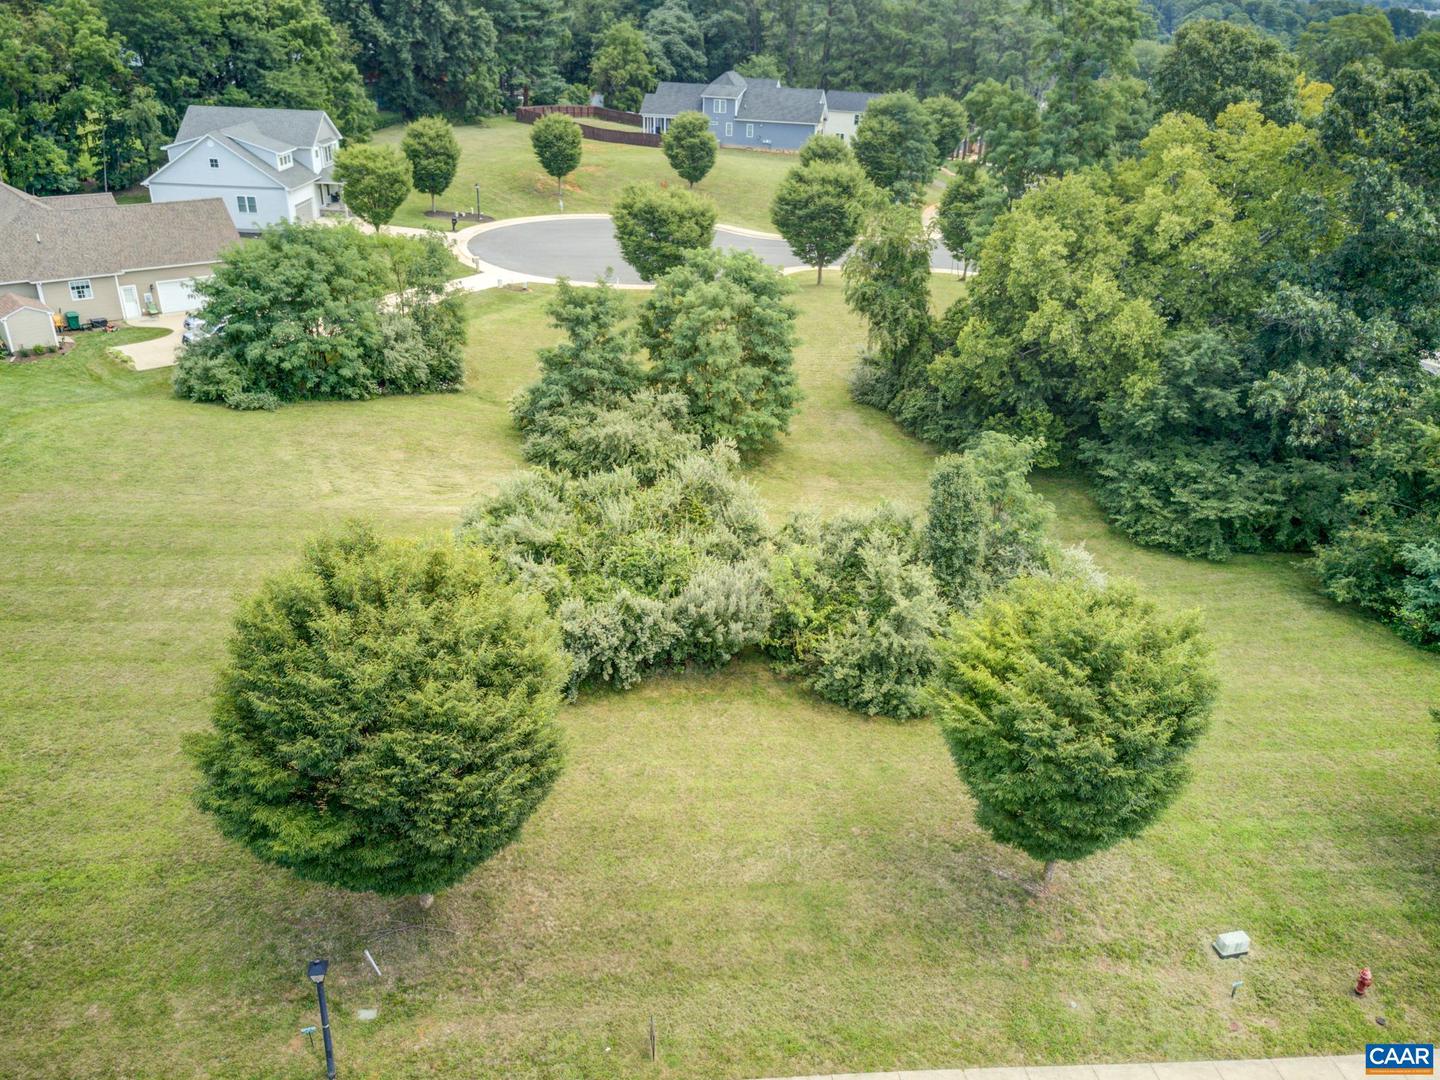 TBD FOREST AVE #11, WAYNESBORO, Virginia 22980, ,Land,For sale,TBD FOREST AVE #11,644742 MLS # 644742